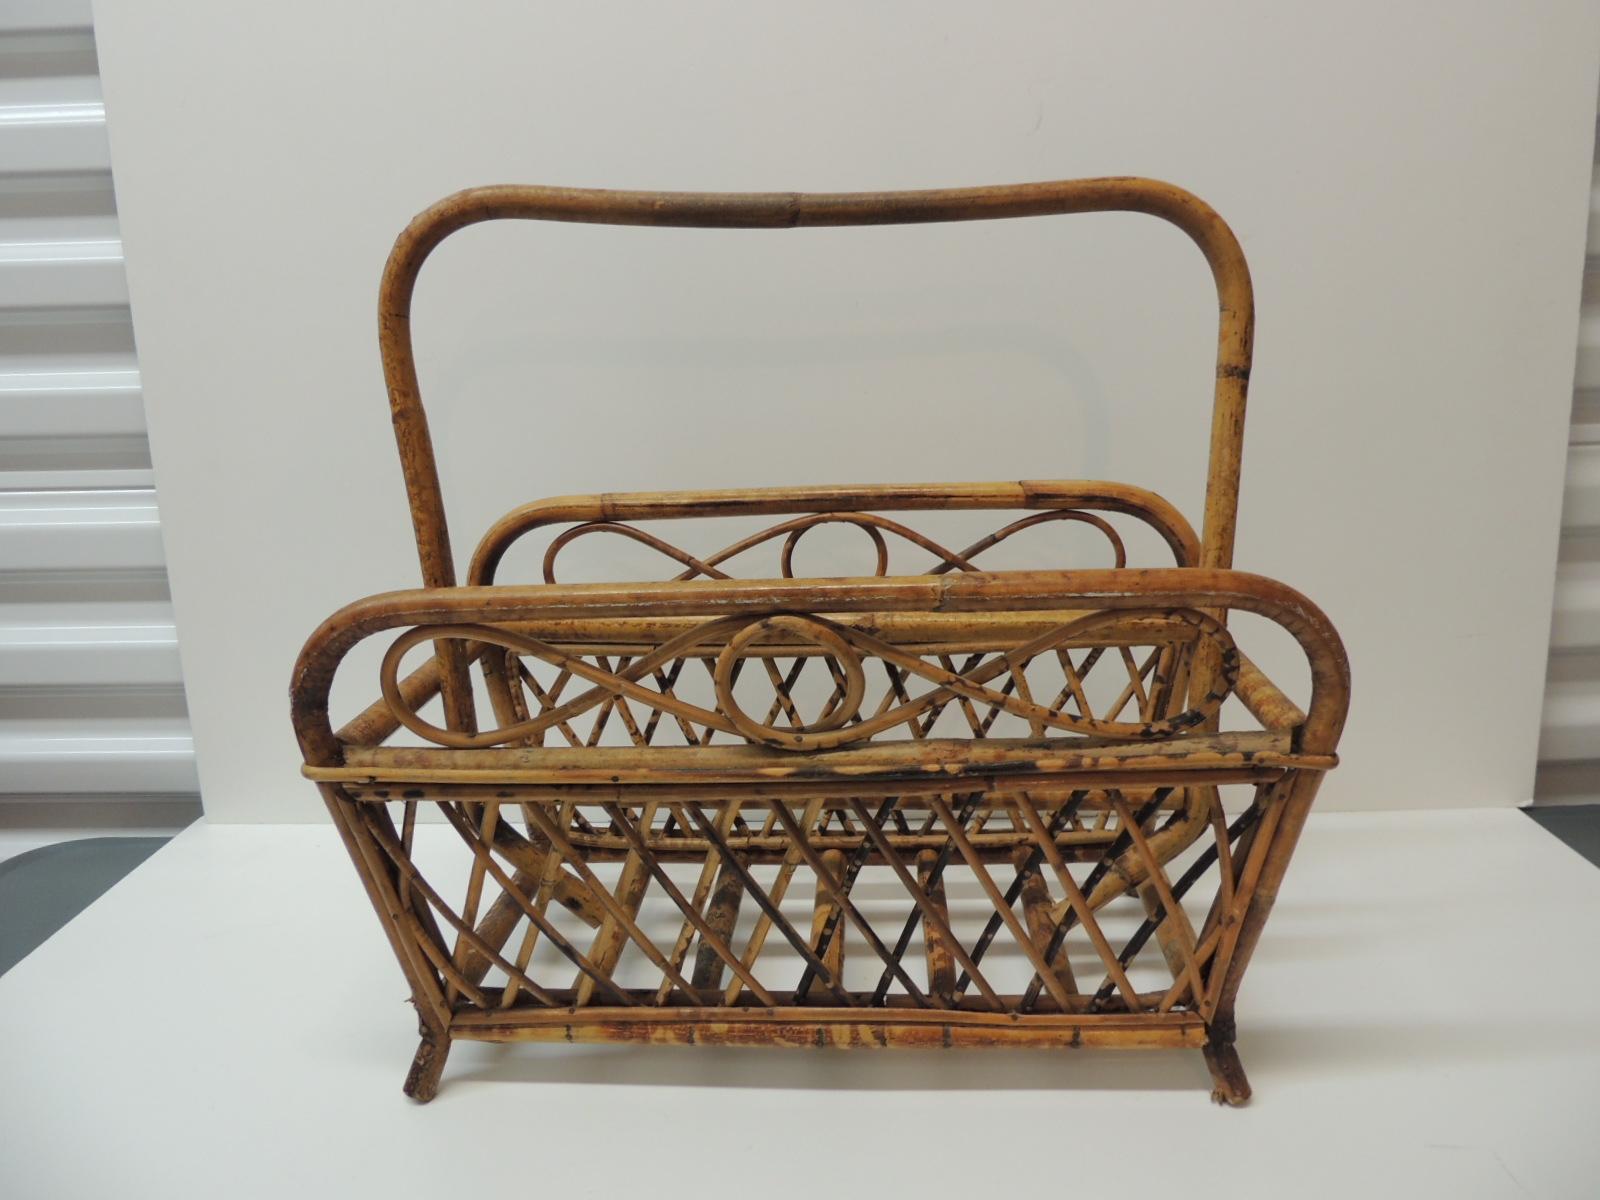 Vintage faux tortoise magazine rack in bamboo and rattan
With trellis pattern and bent wicker details
Size: 17